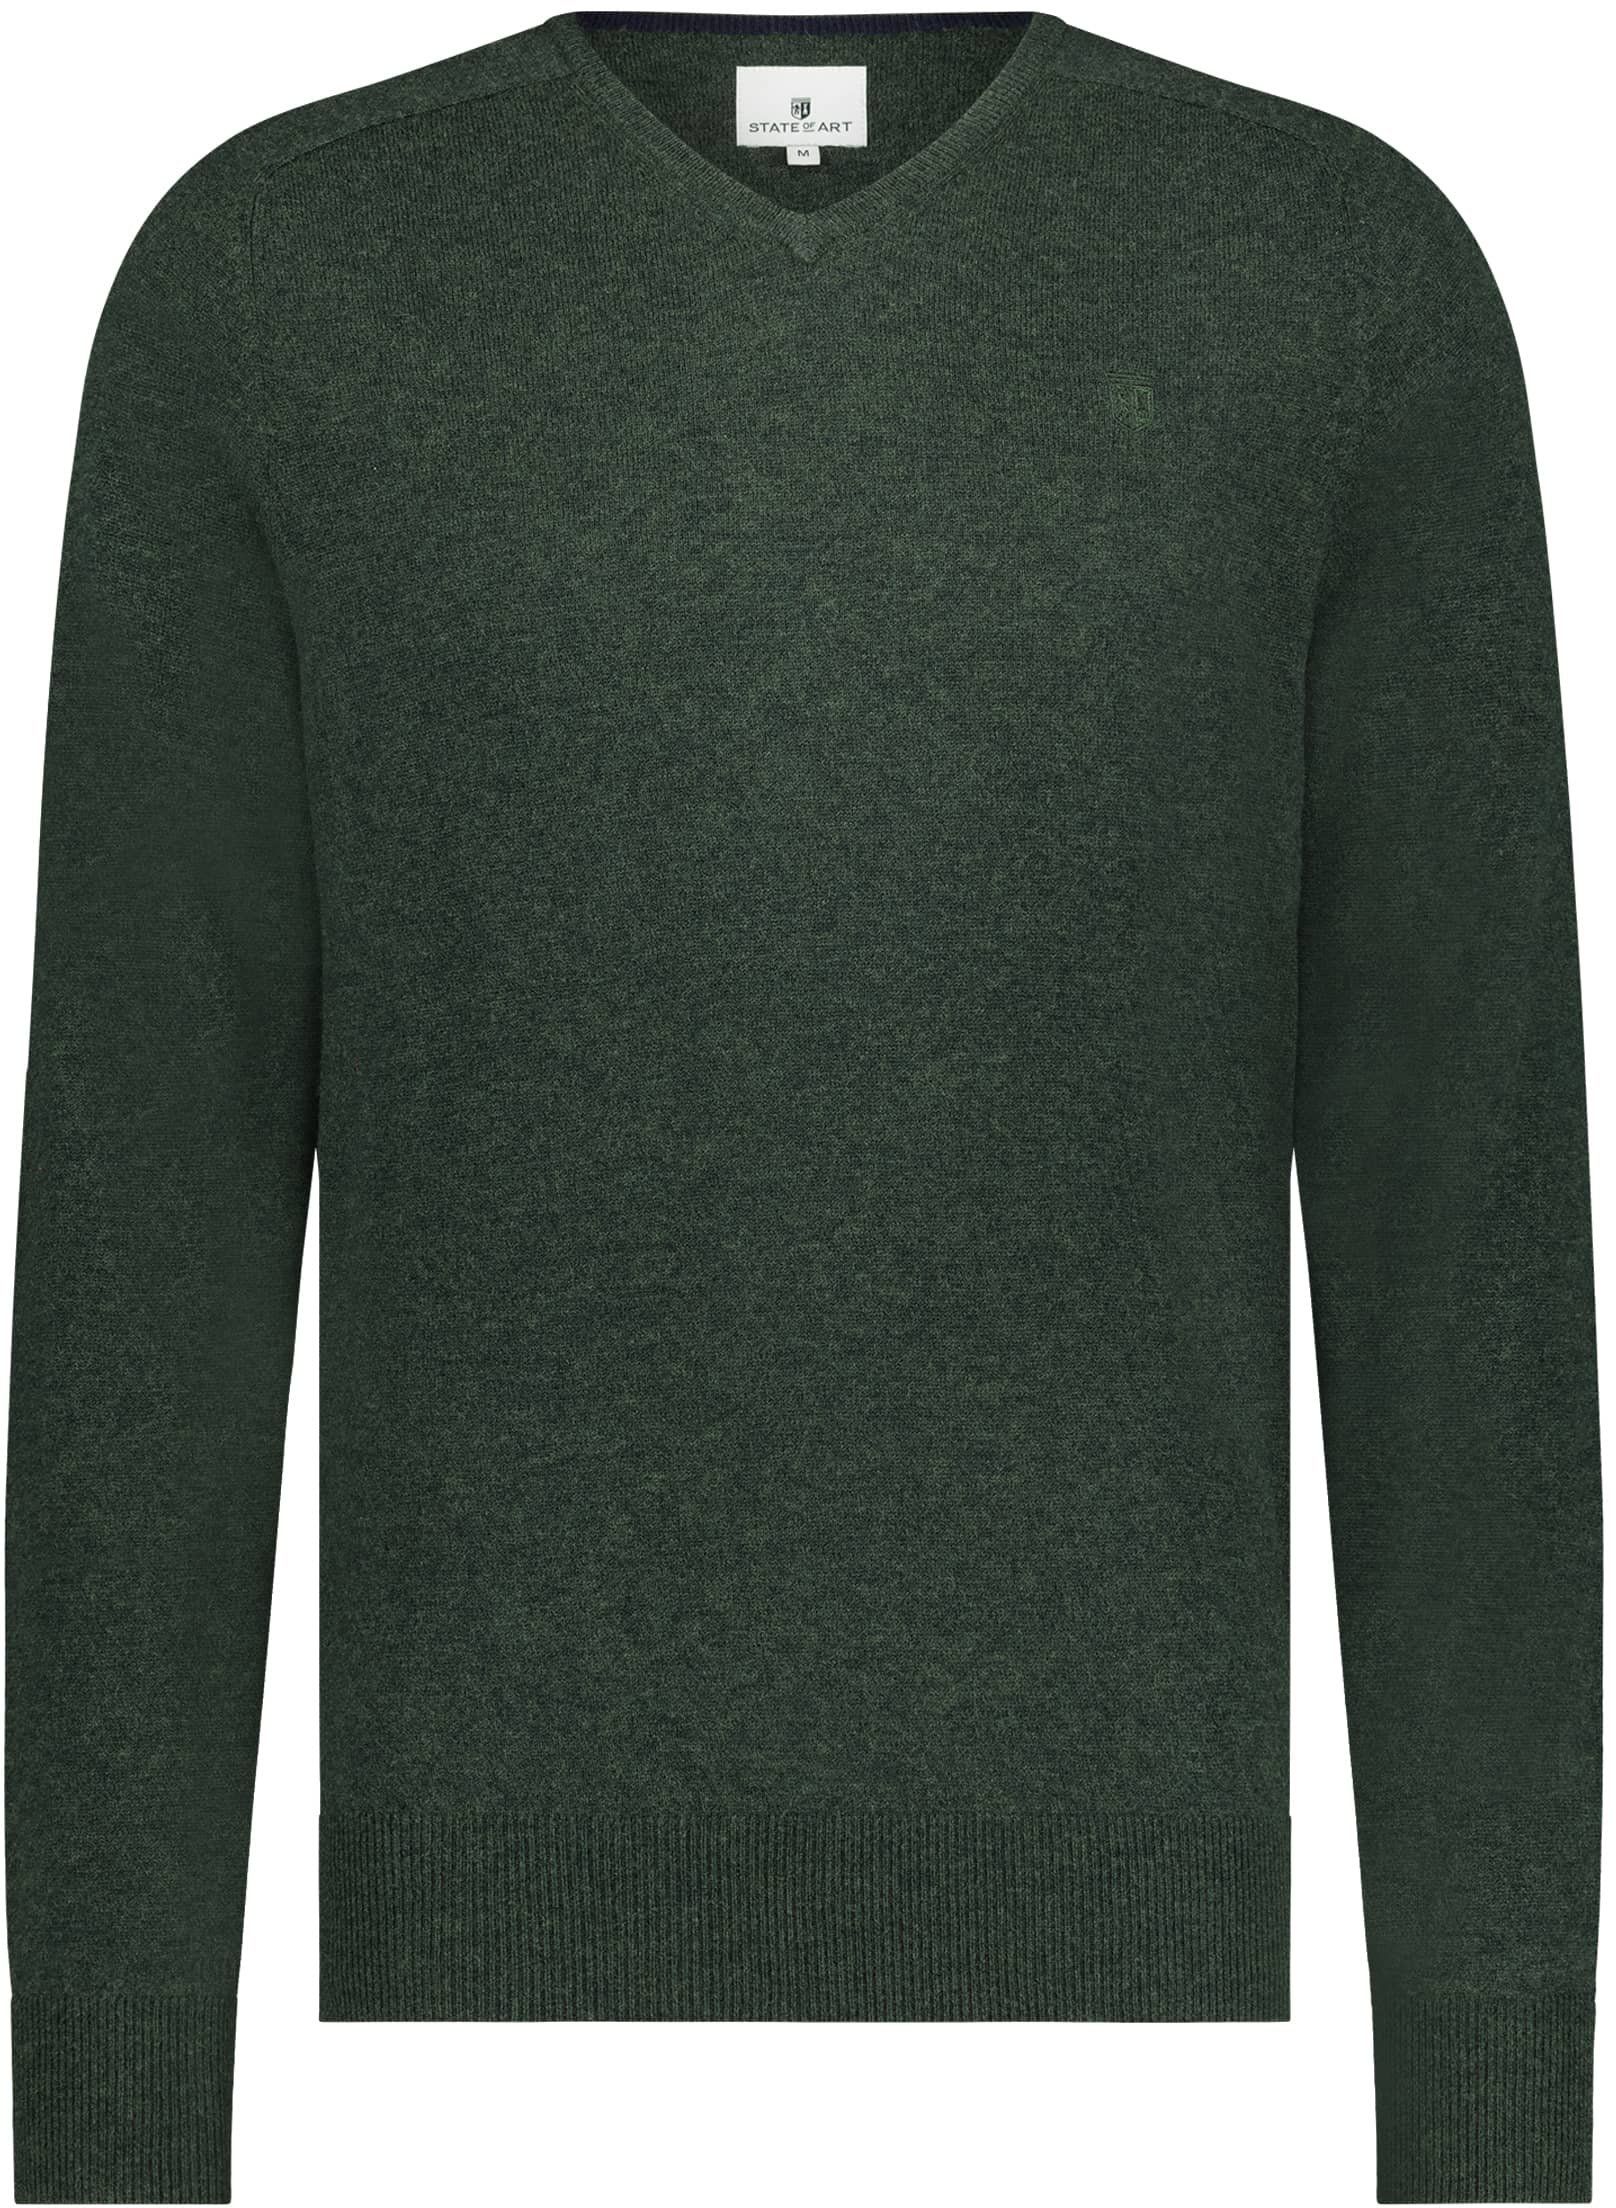 State Of Art Pullover V-Neck Moss Dark Green Green size L